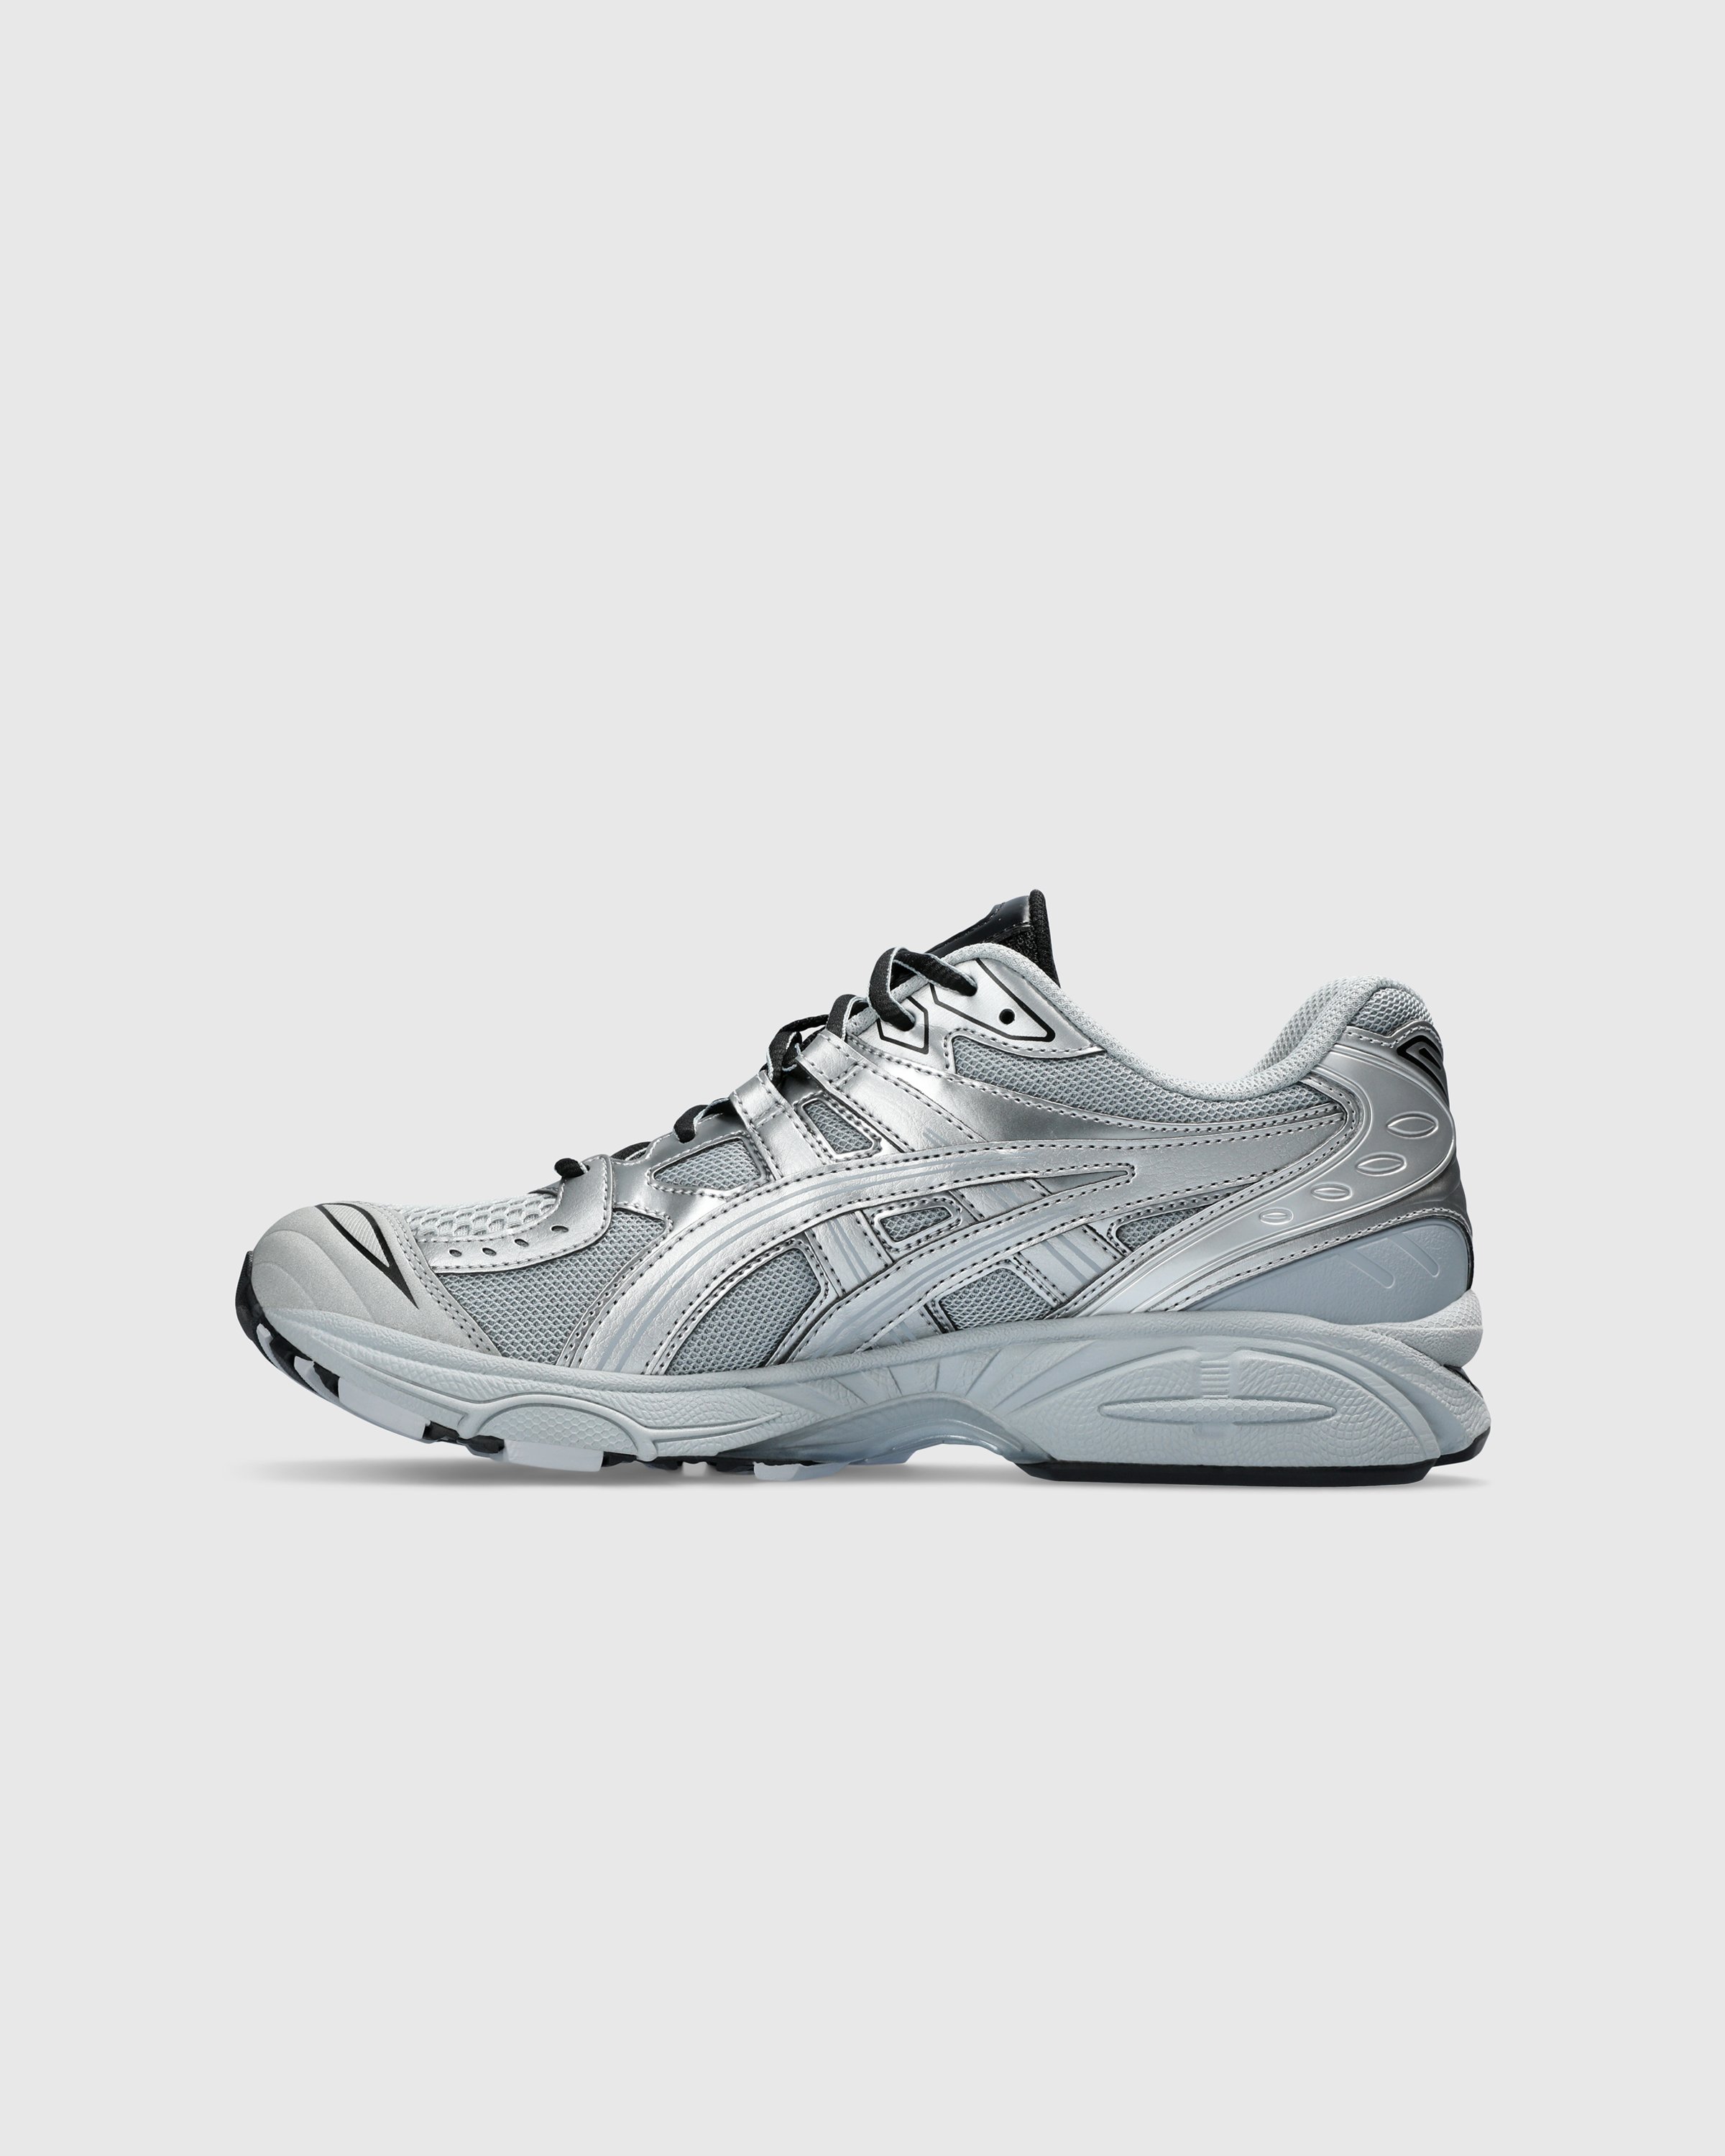 asics - GEL-KAYANO 14 Pure Silver/Pure Silver - Footwear - Silver - Image 2